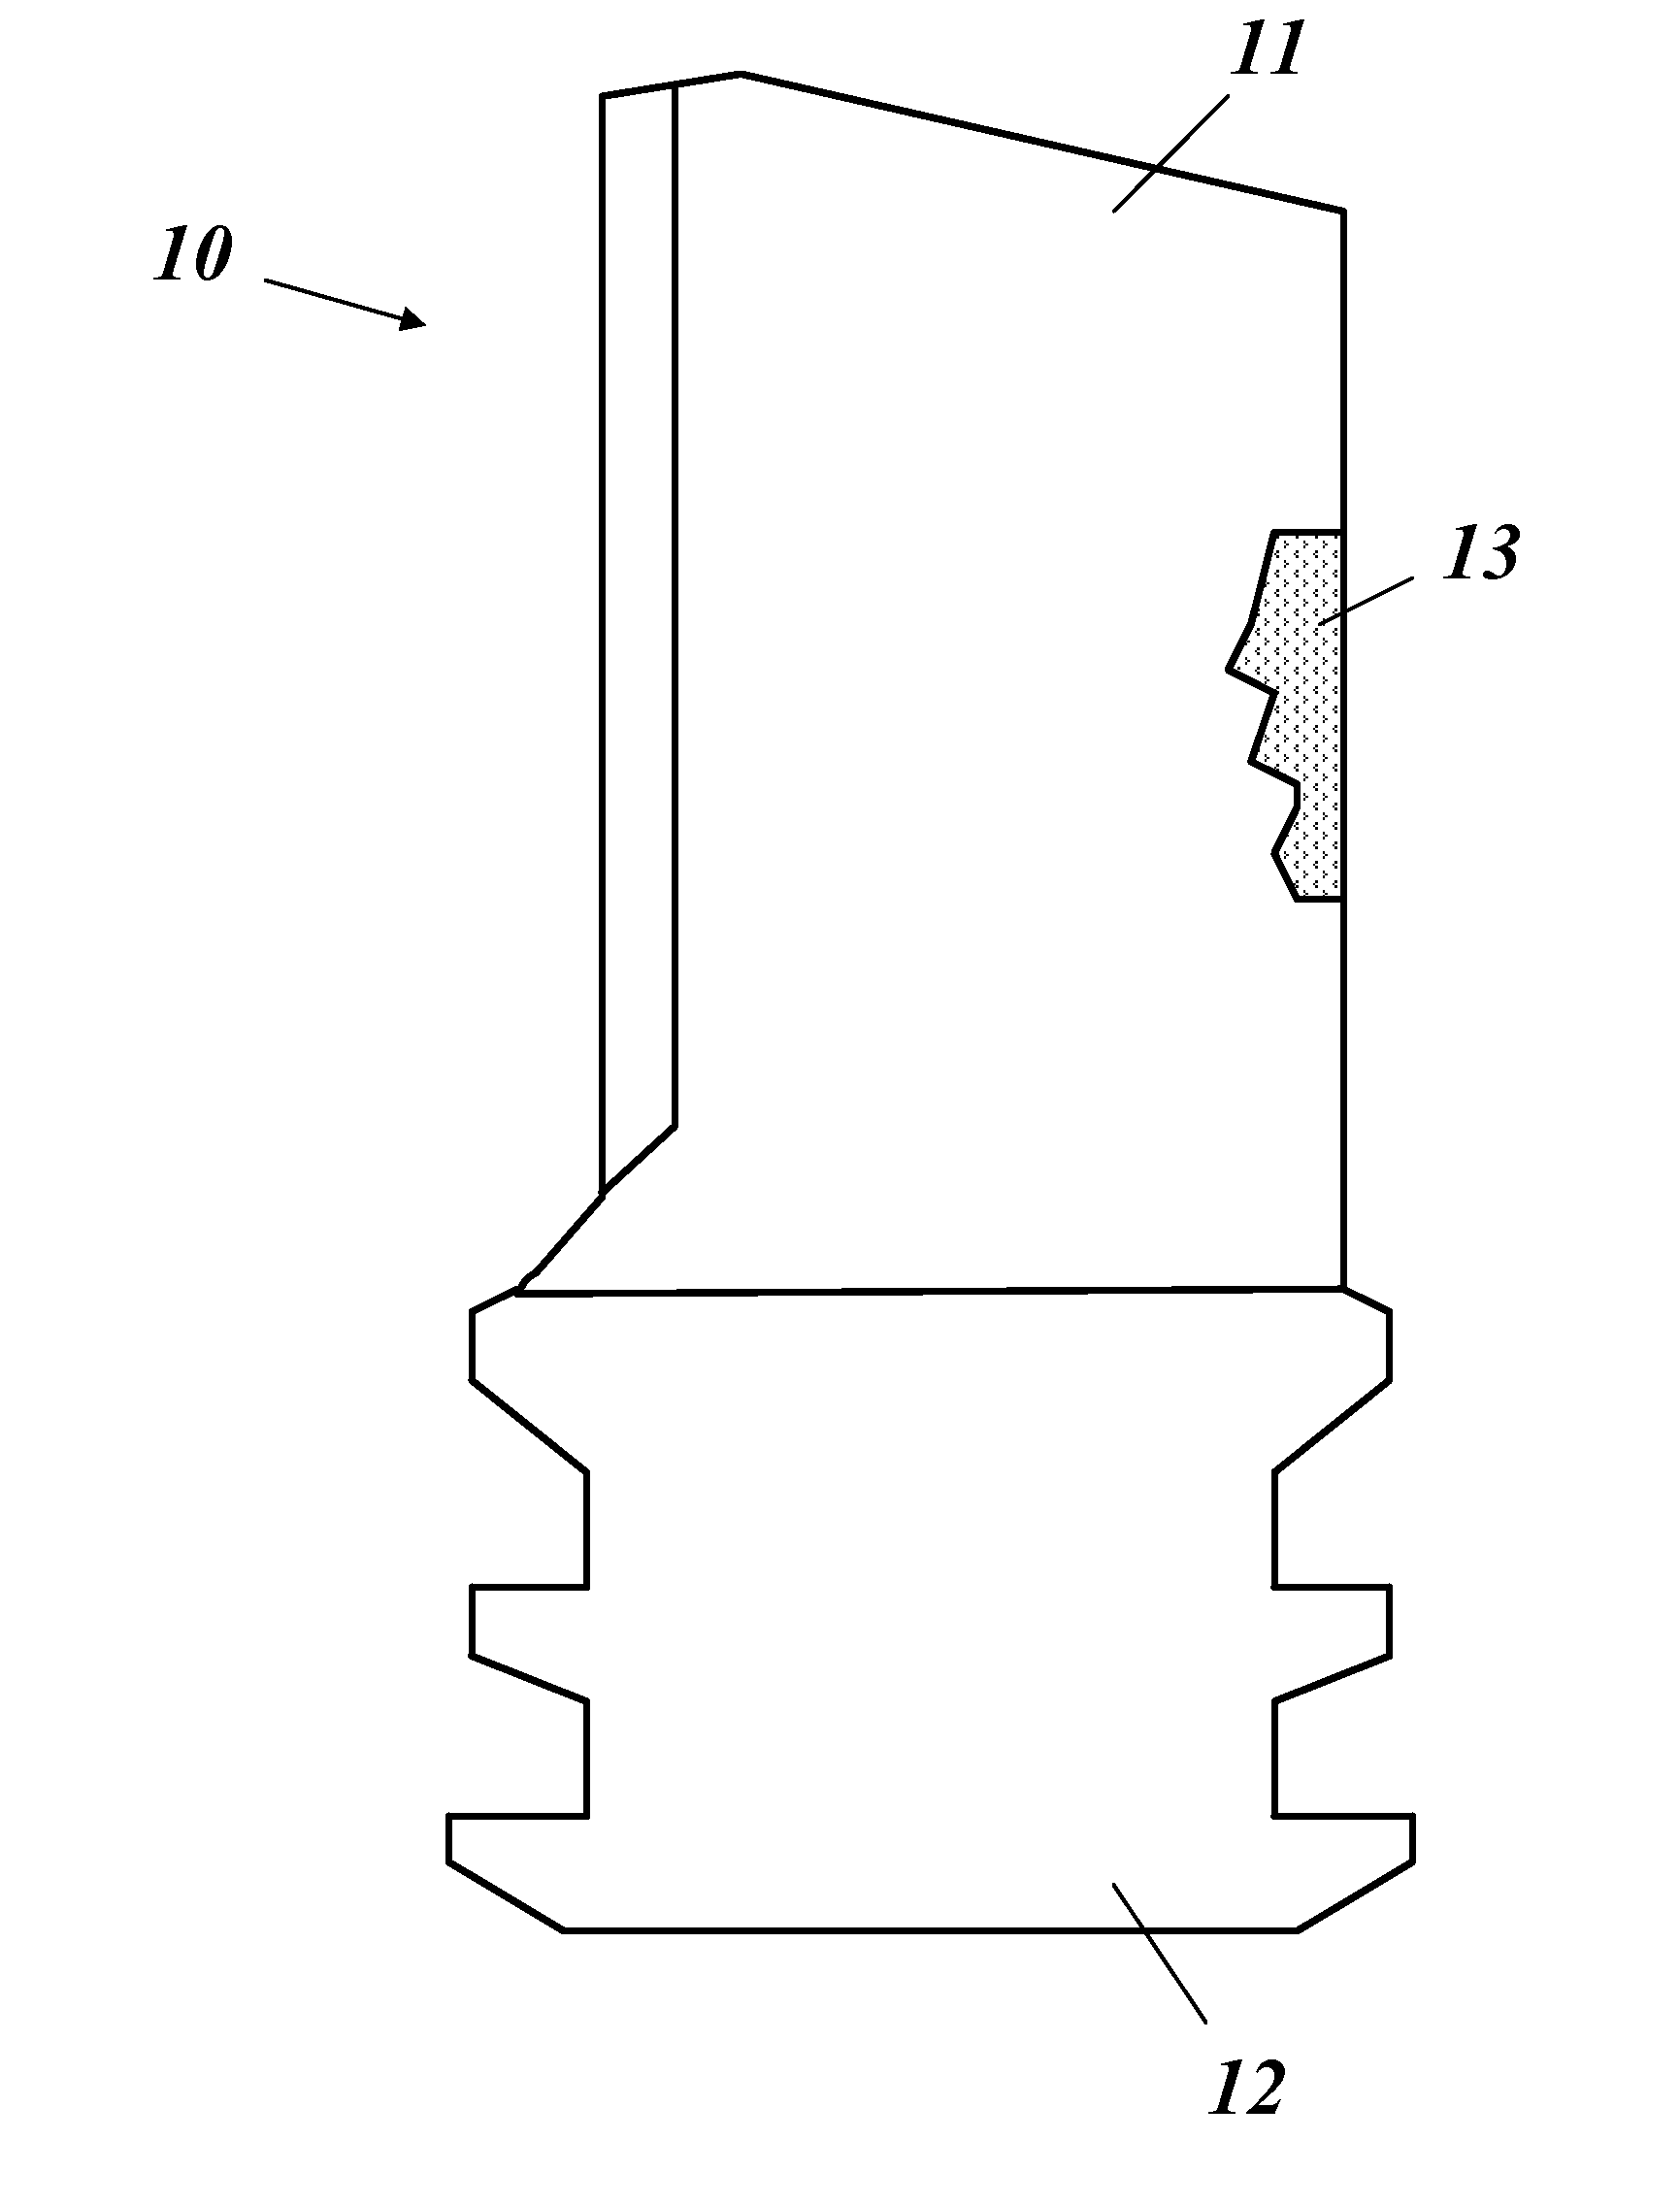 Method for repairing a gas turbine component